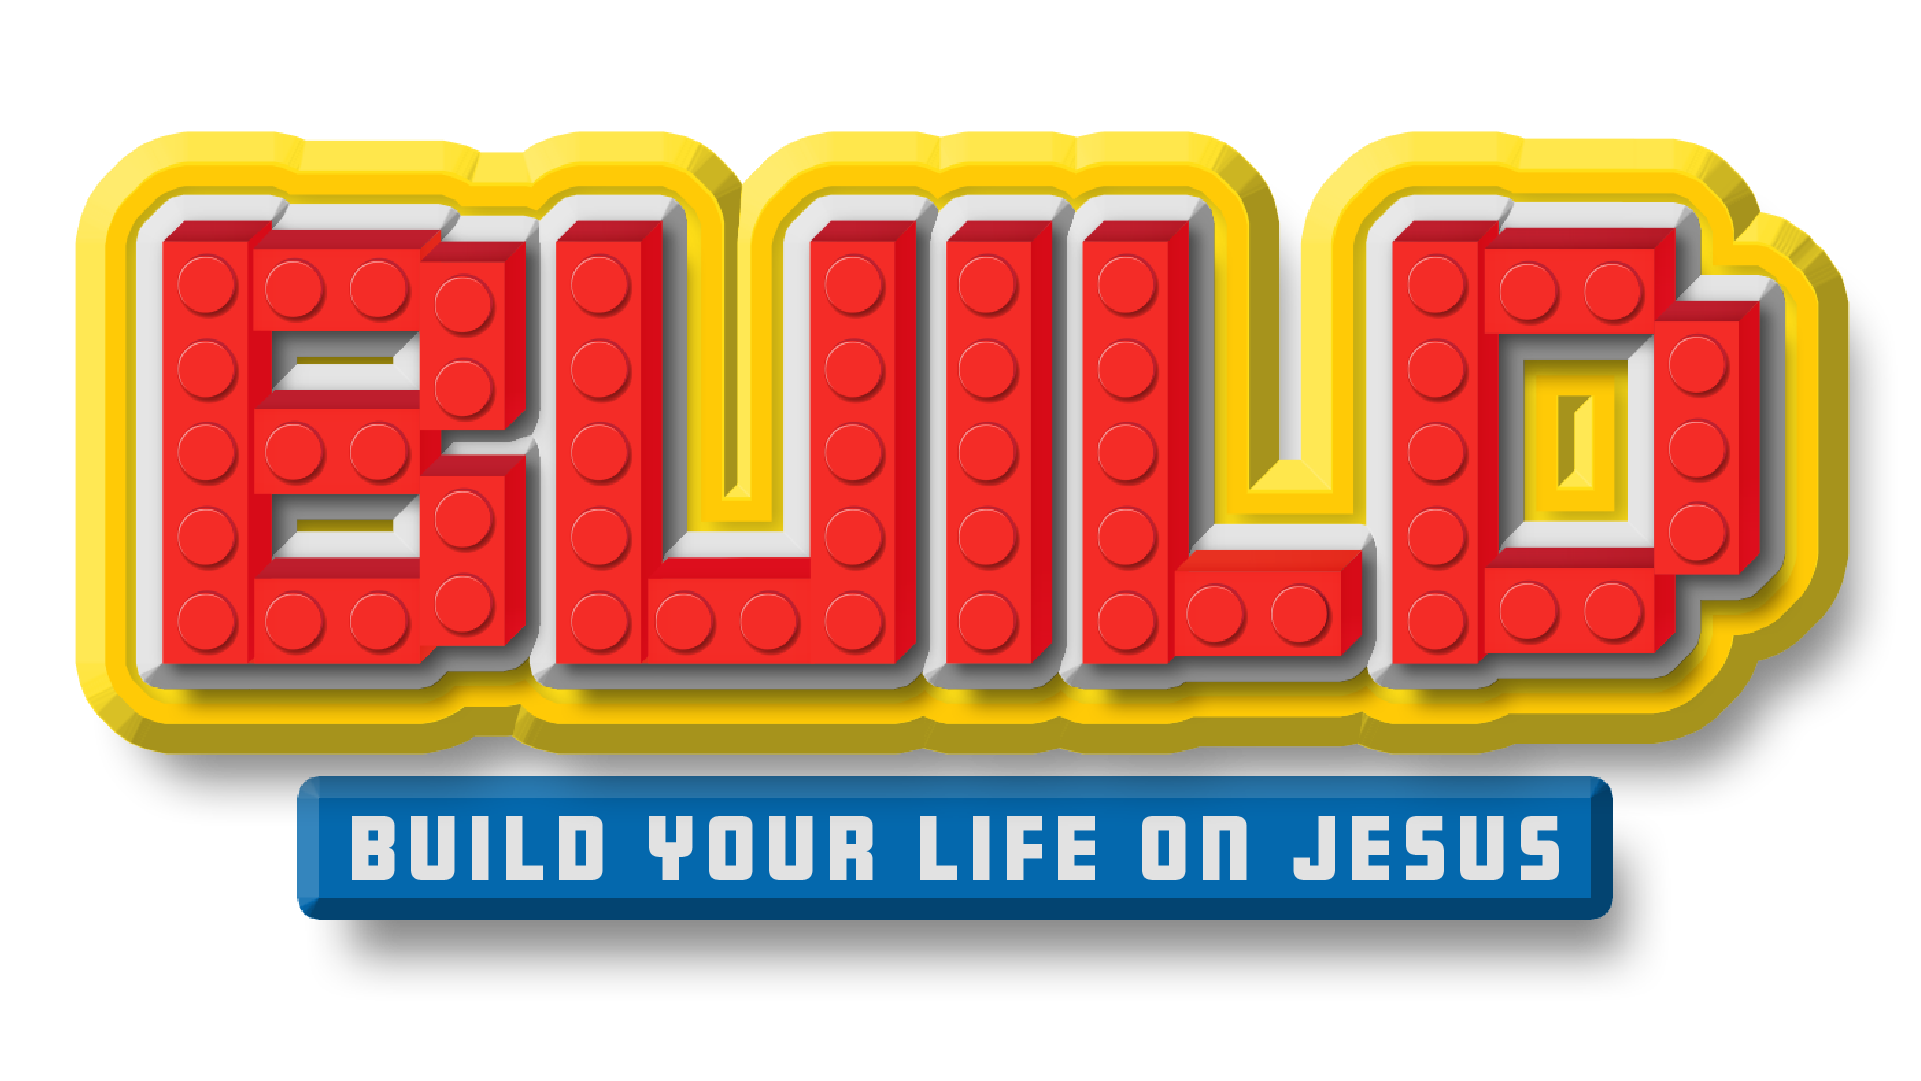 Build your life for Jesus